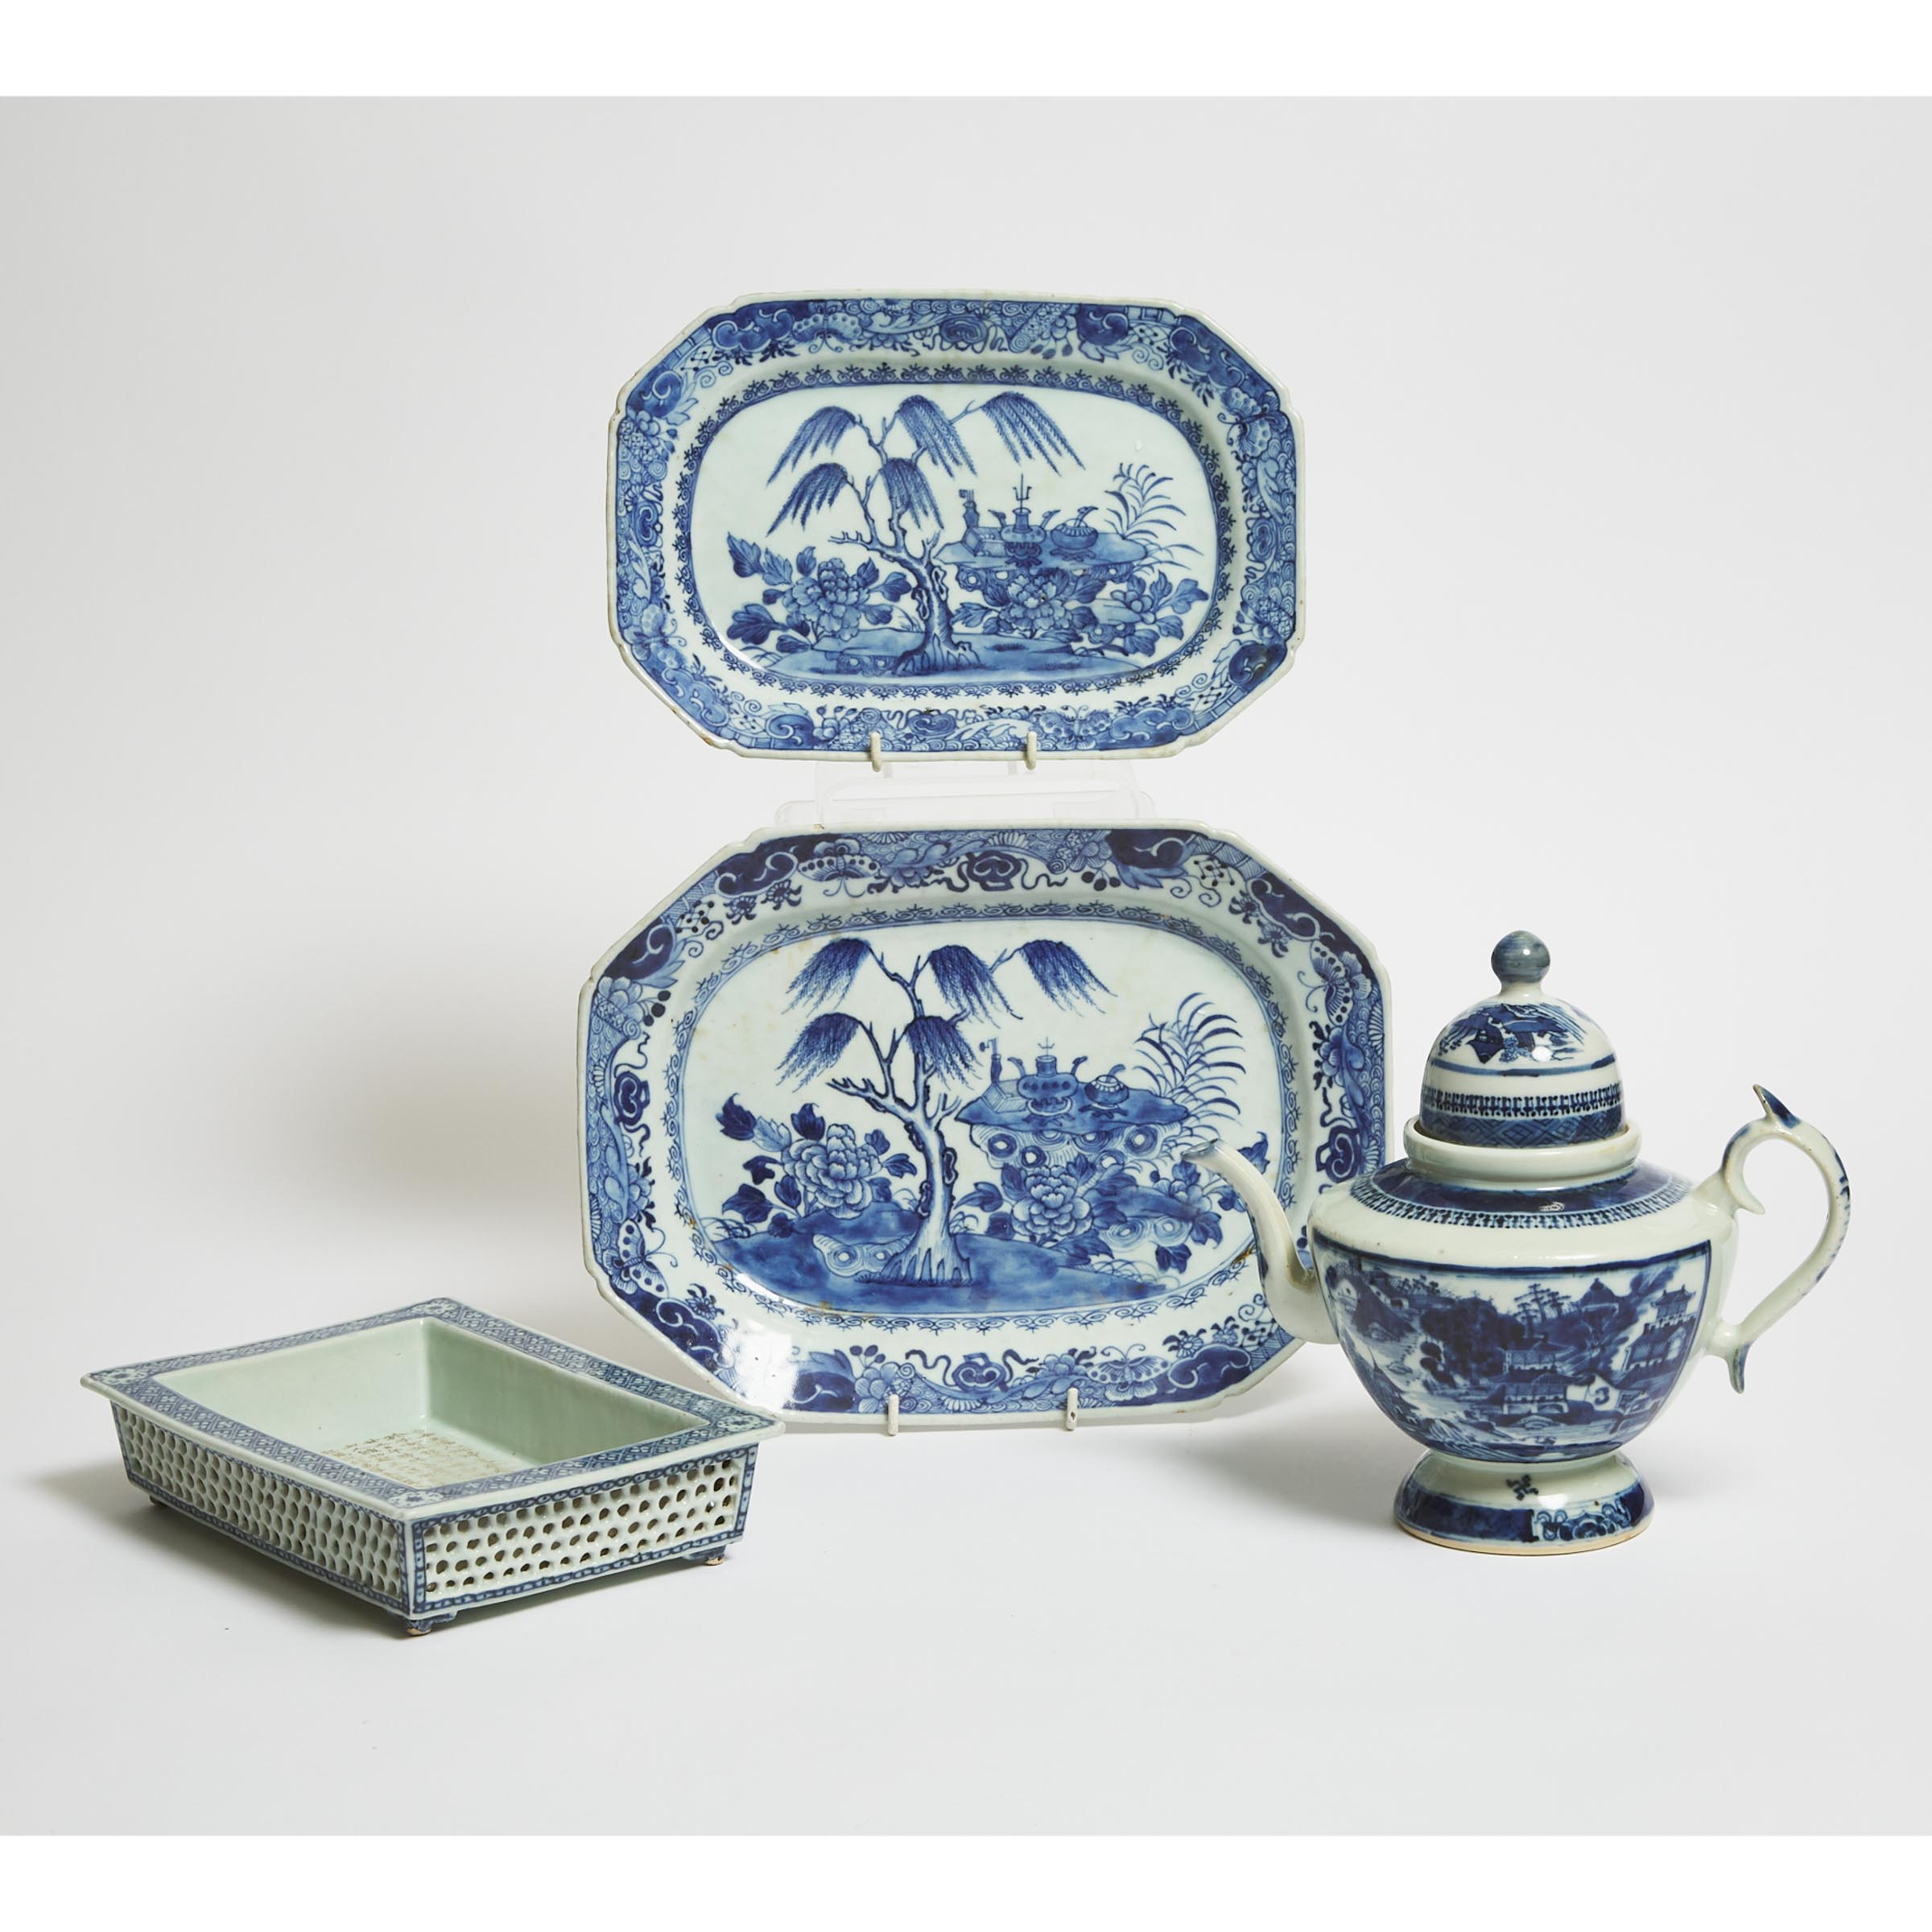 A Group of Four Blue and White Platters, Teapot, and Daffodil Basin, 18th/19th Century